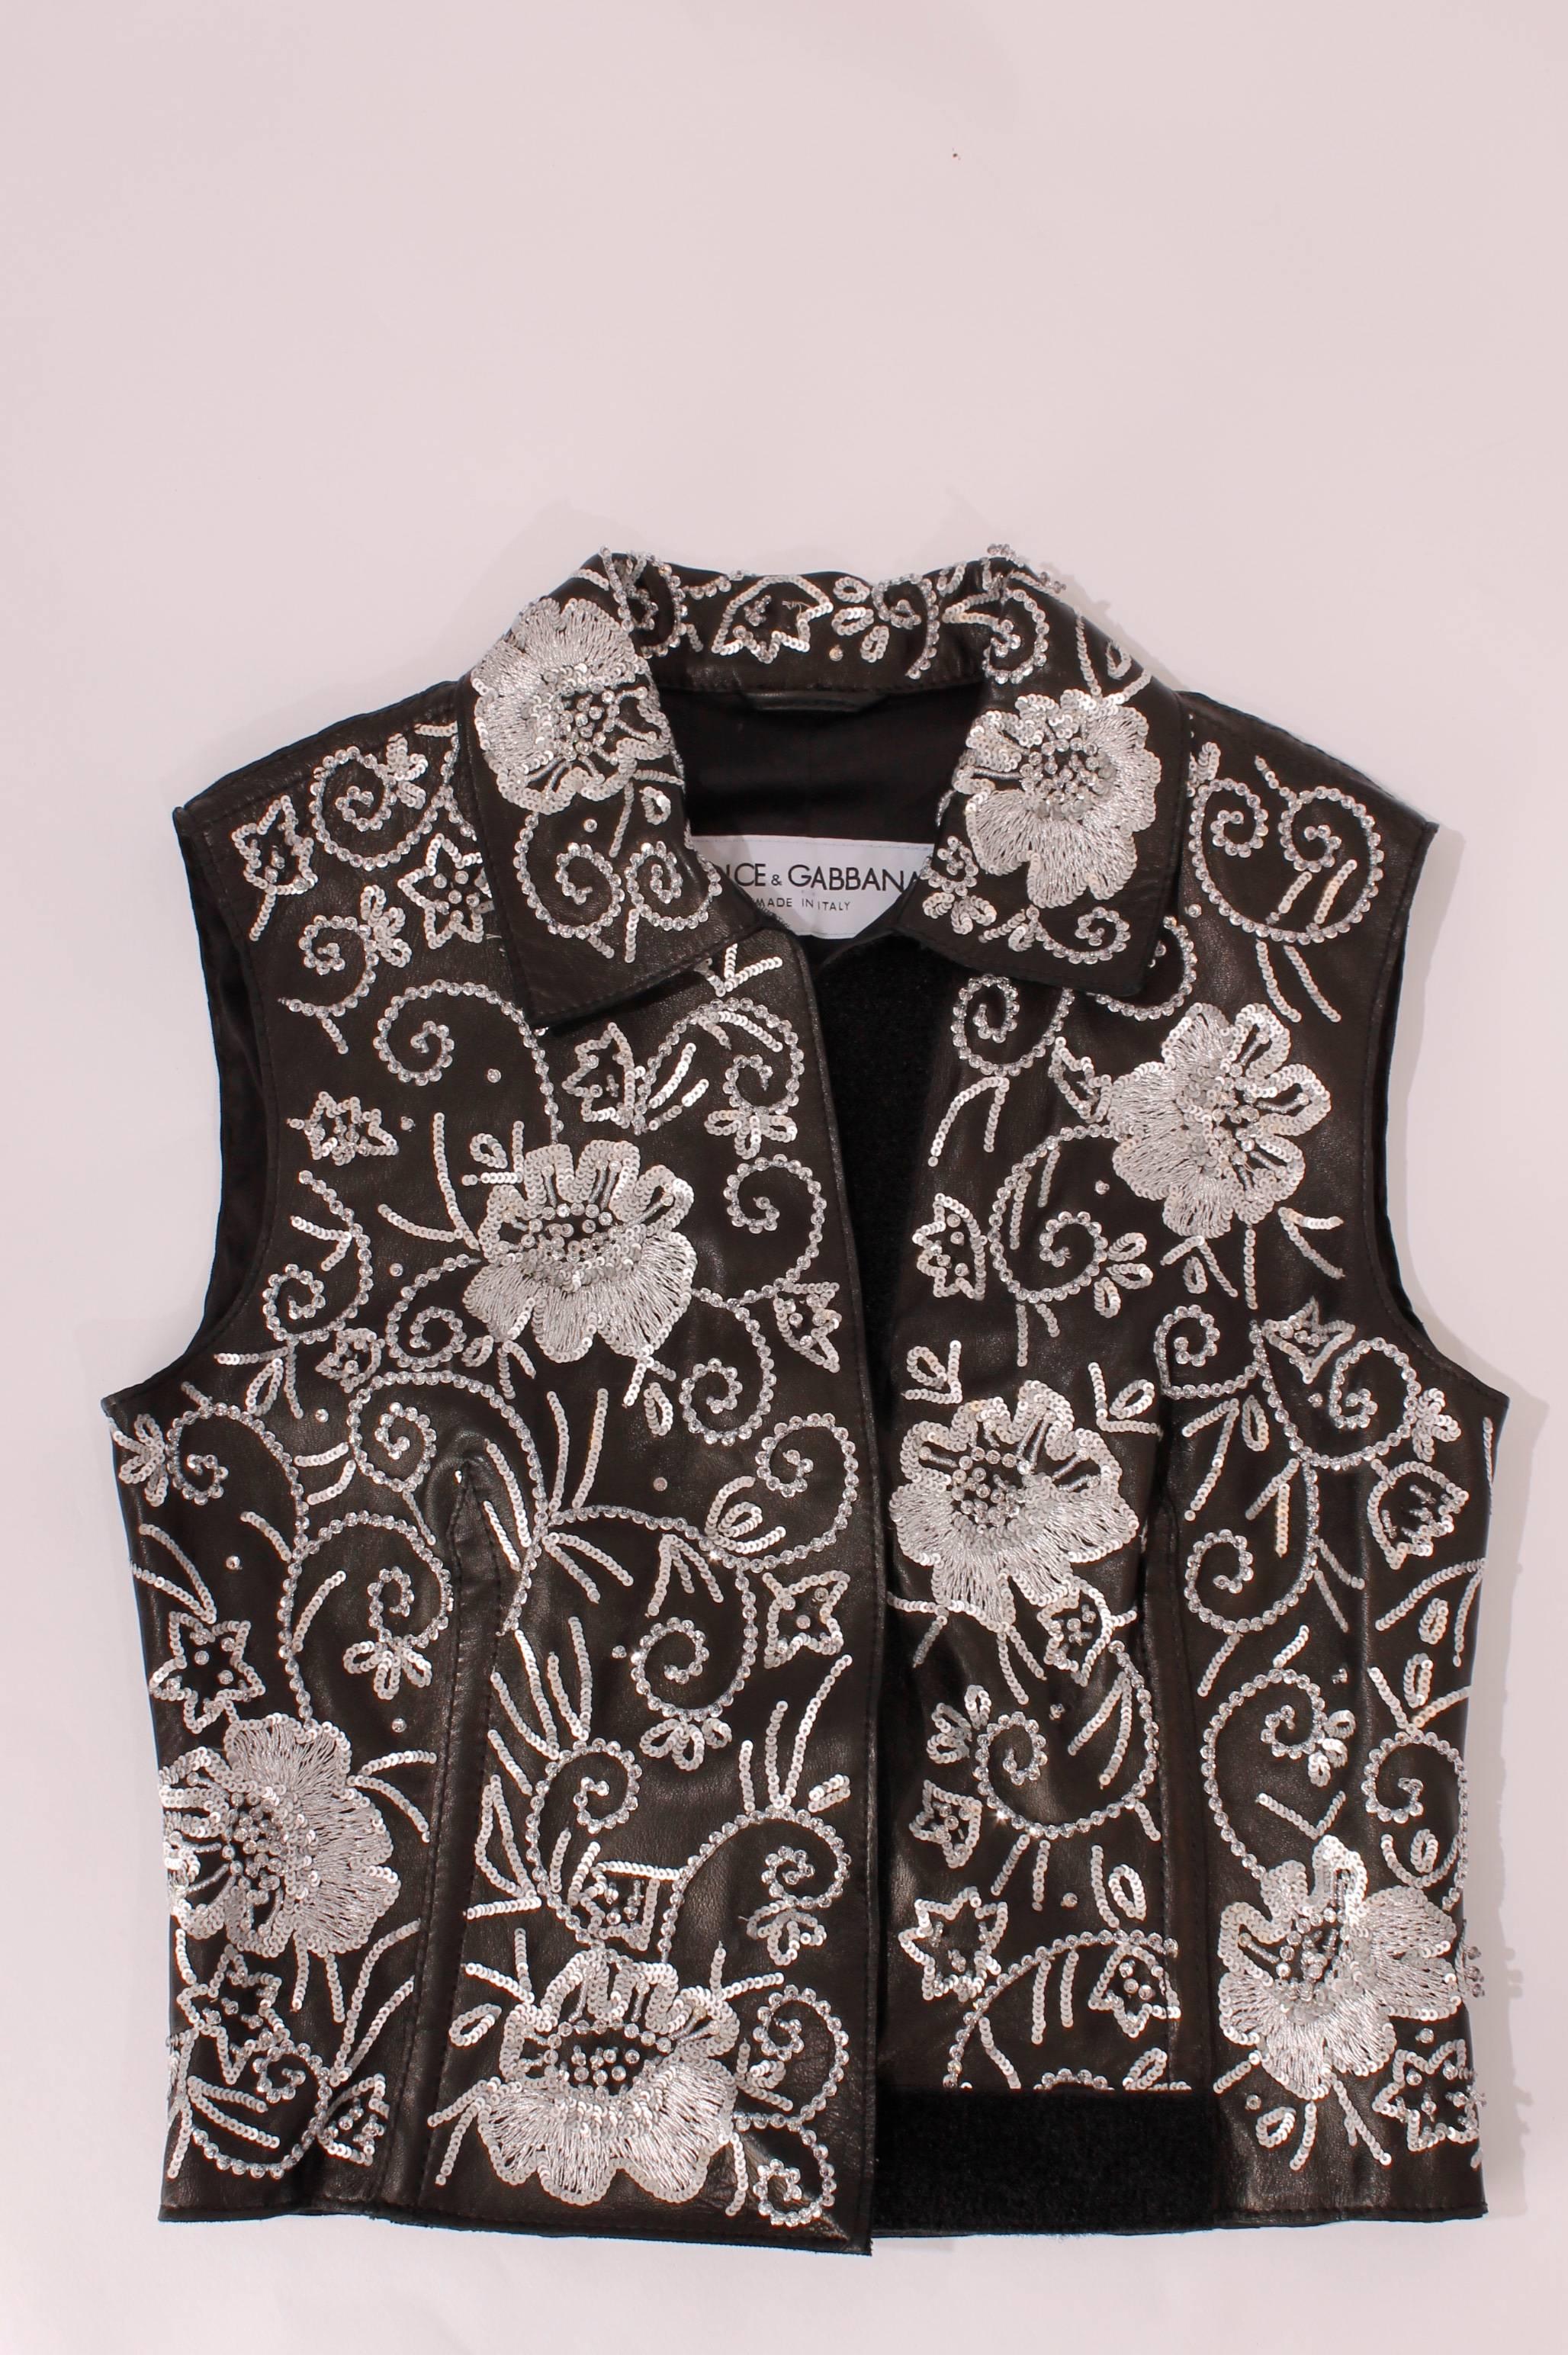 Black vest with embroidery of flowers made with stones and sequins. Closes with velcro.

Italy size 42

